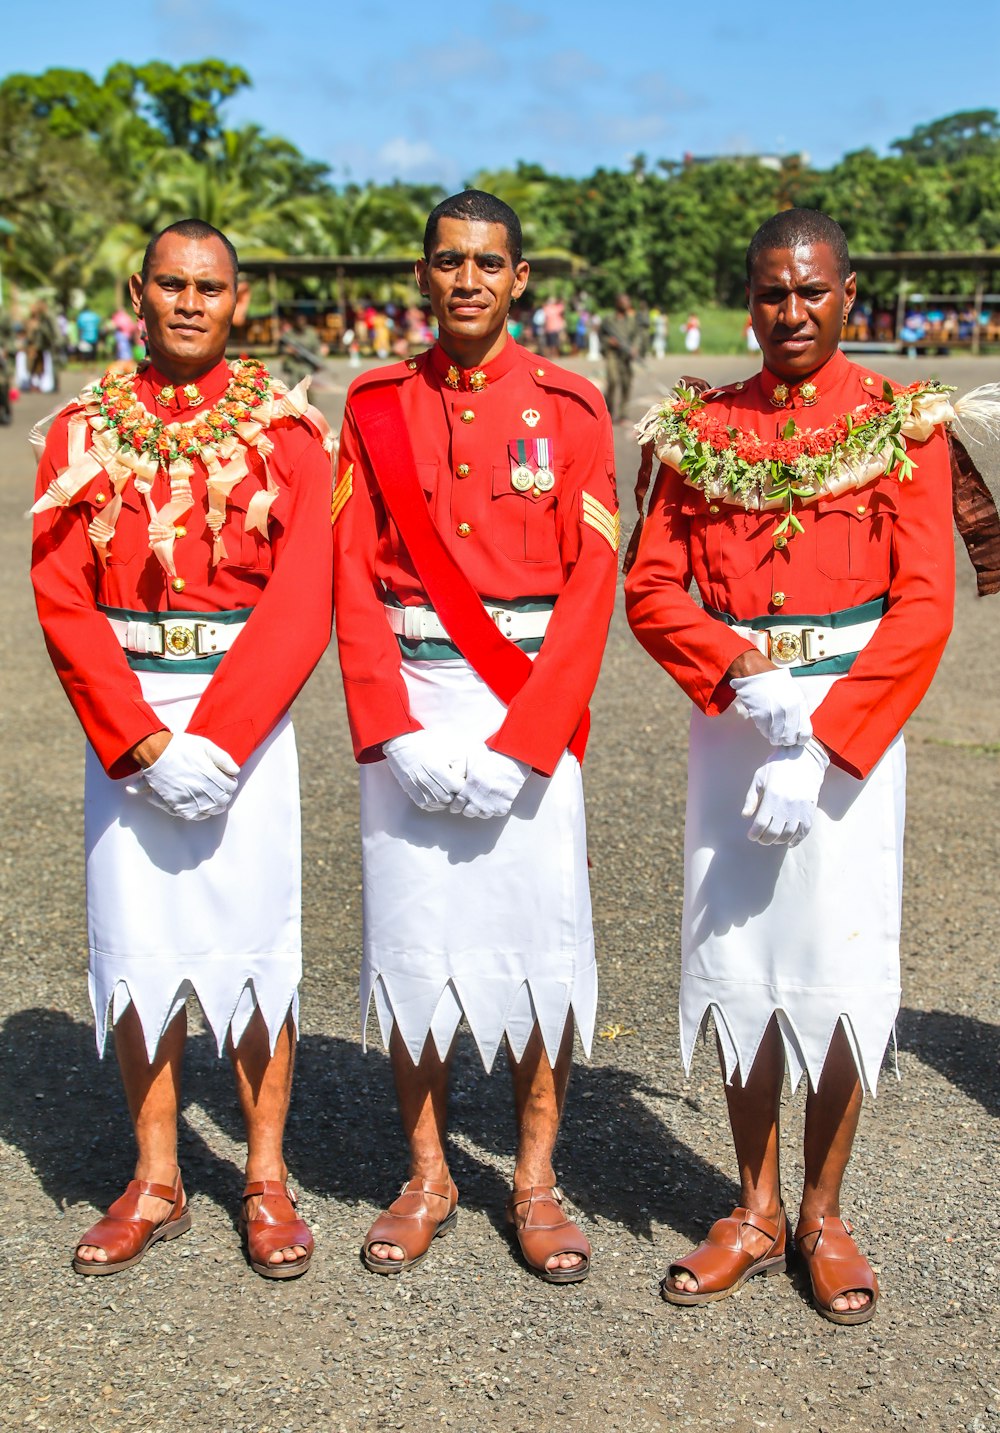 three men dressed in red and white standing next to each other